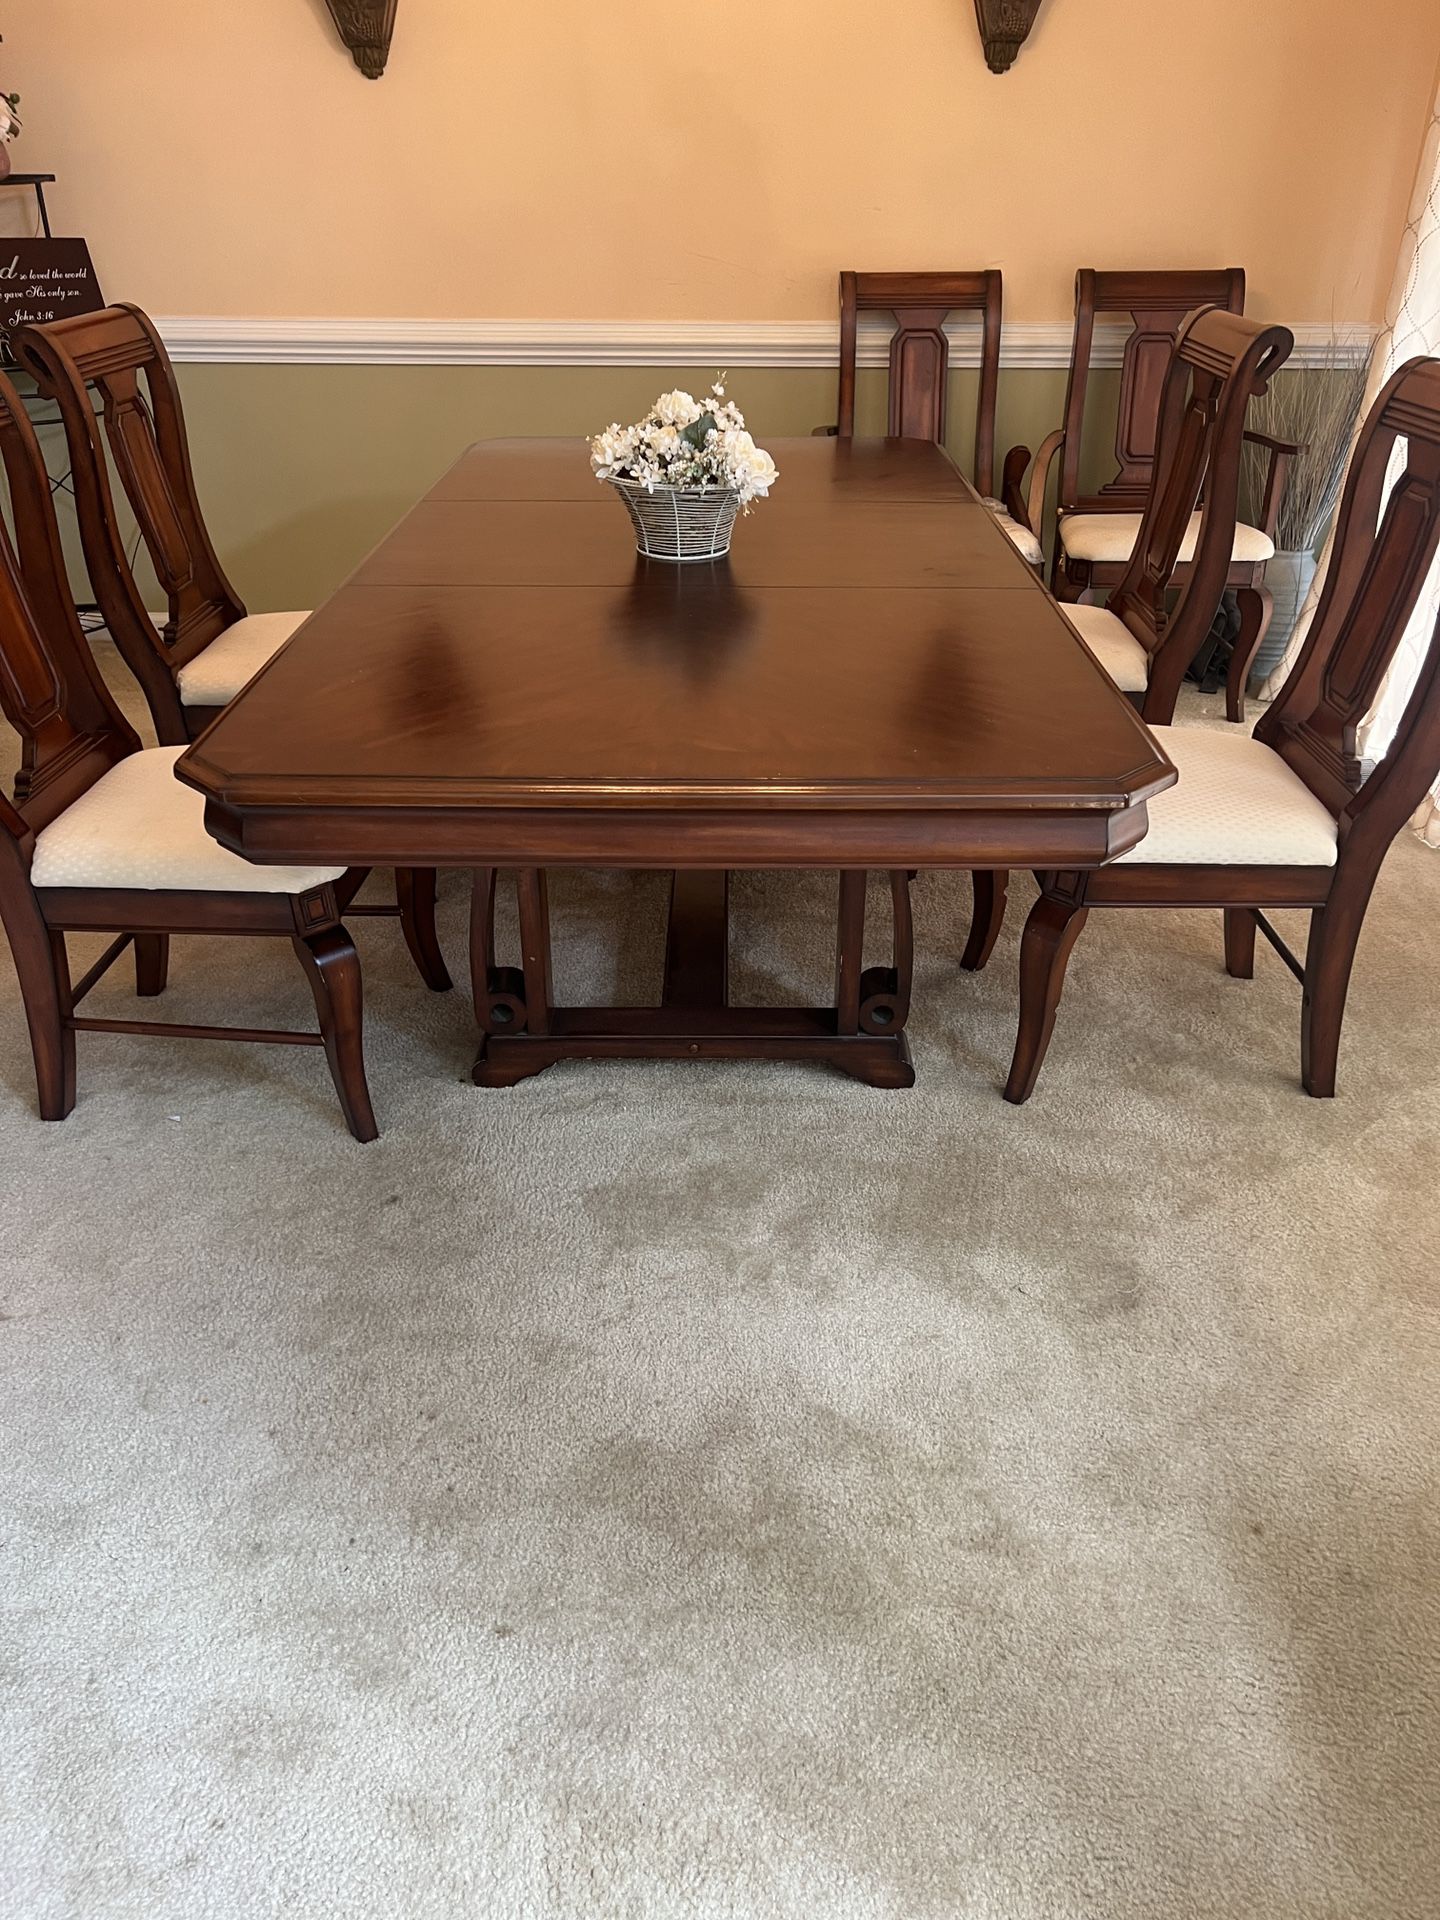 Dinning Room Table  and  Sideboard (without Chairs)  Dinning table measures 60” X 42” maybe extended to 84” X 42” height 30” The side table measure 75